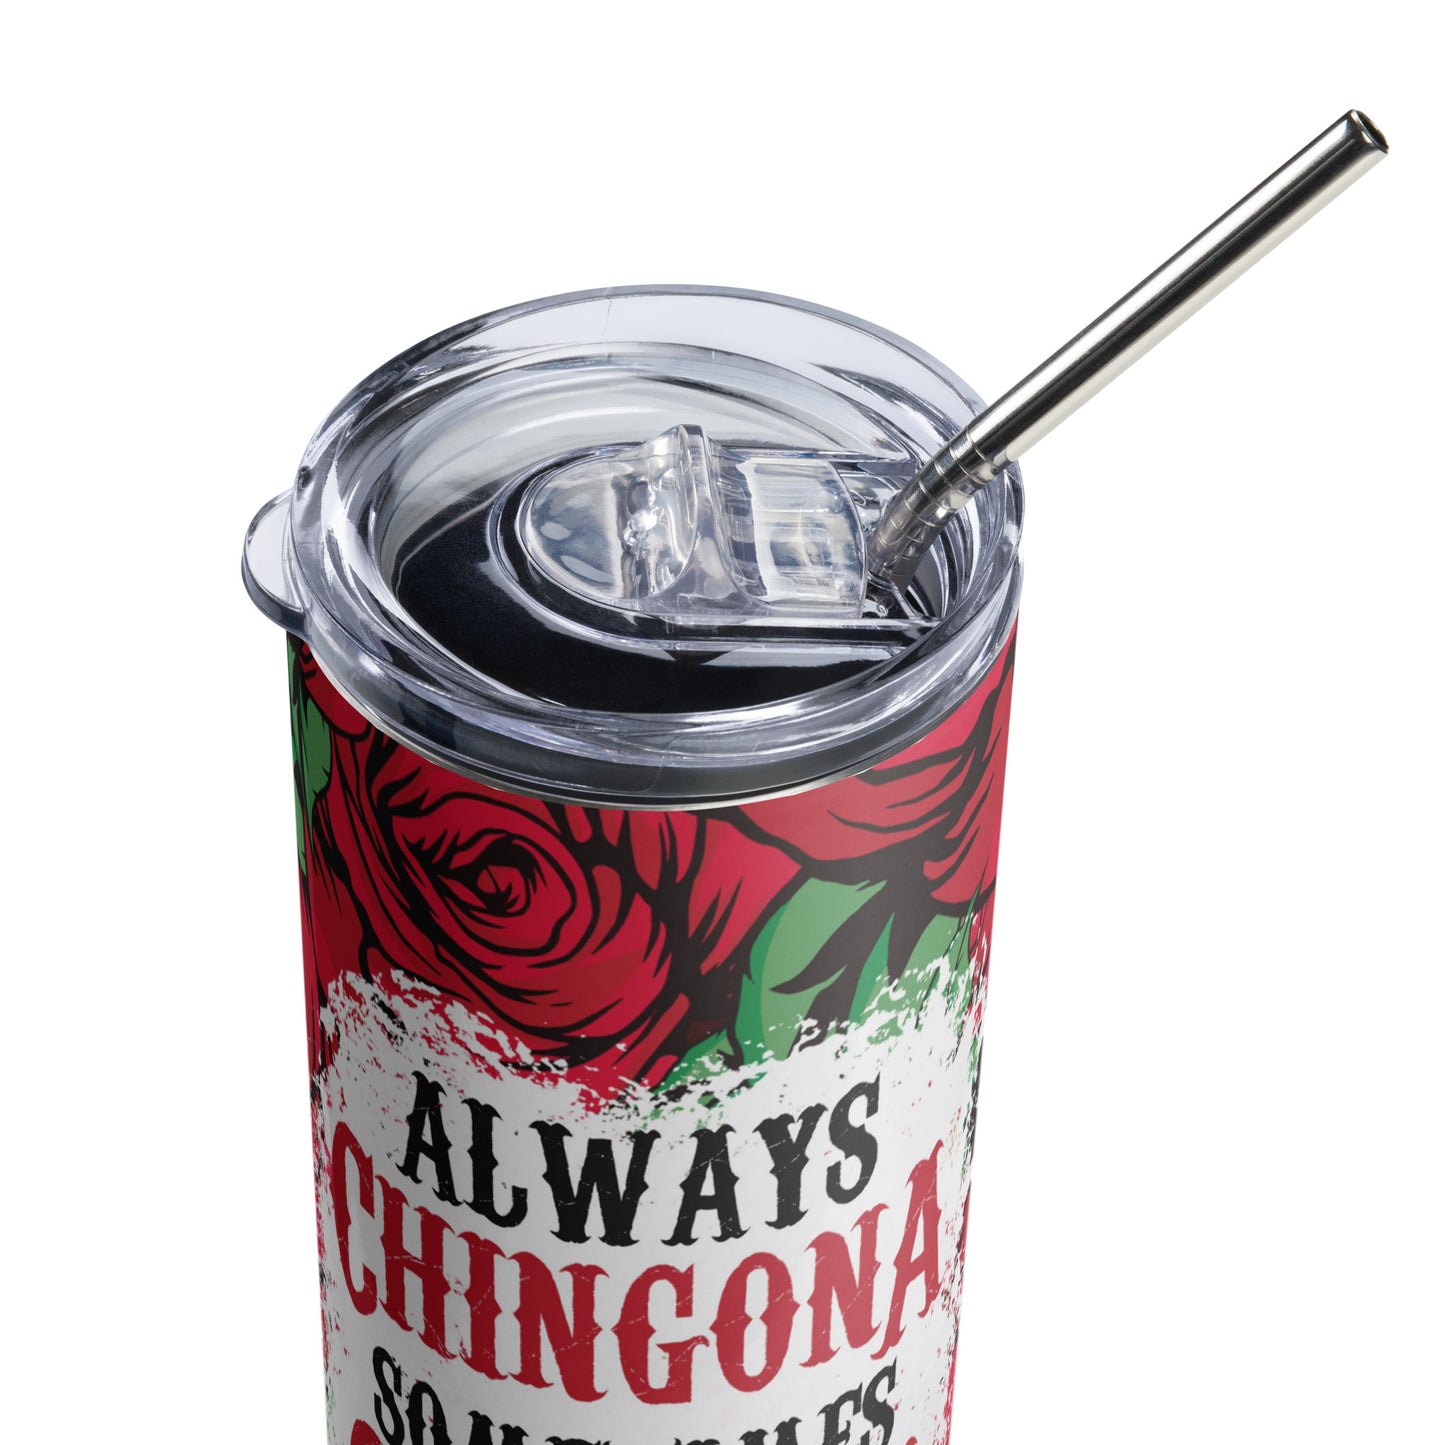 Always Chingona Sometimes Cabrona But Never Pendeja Stainless steel Tumbler